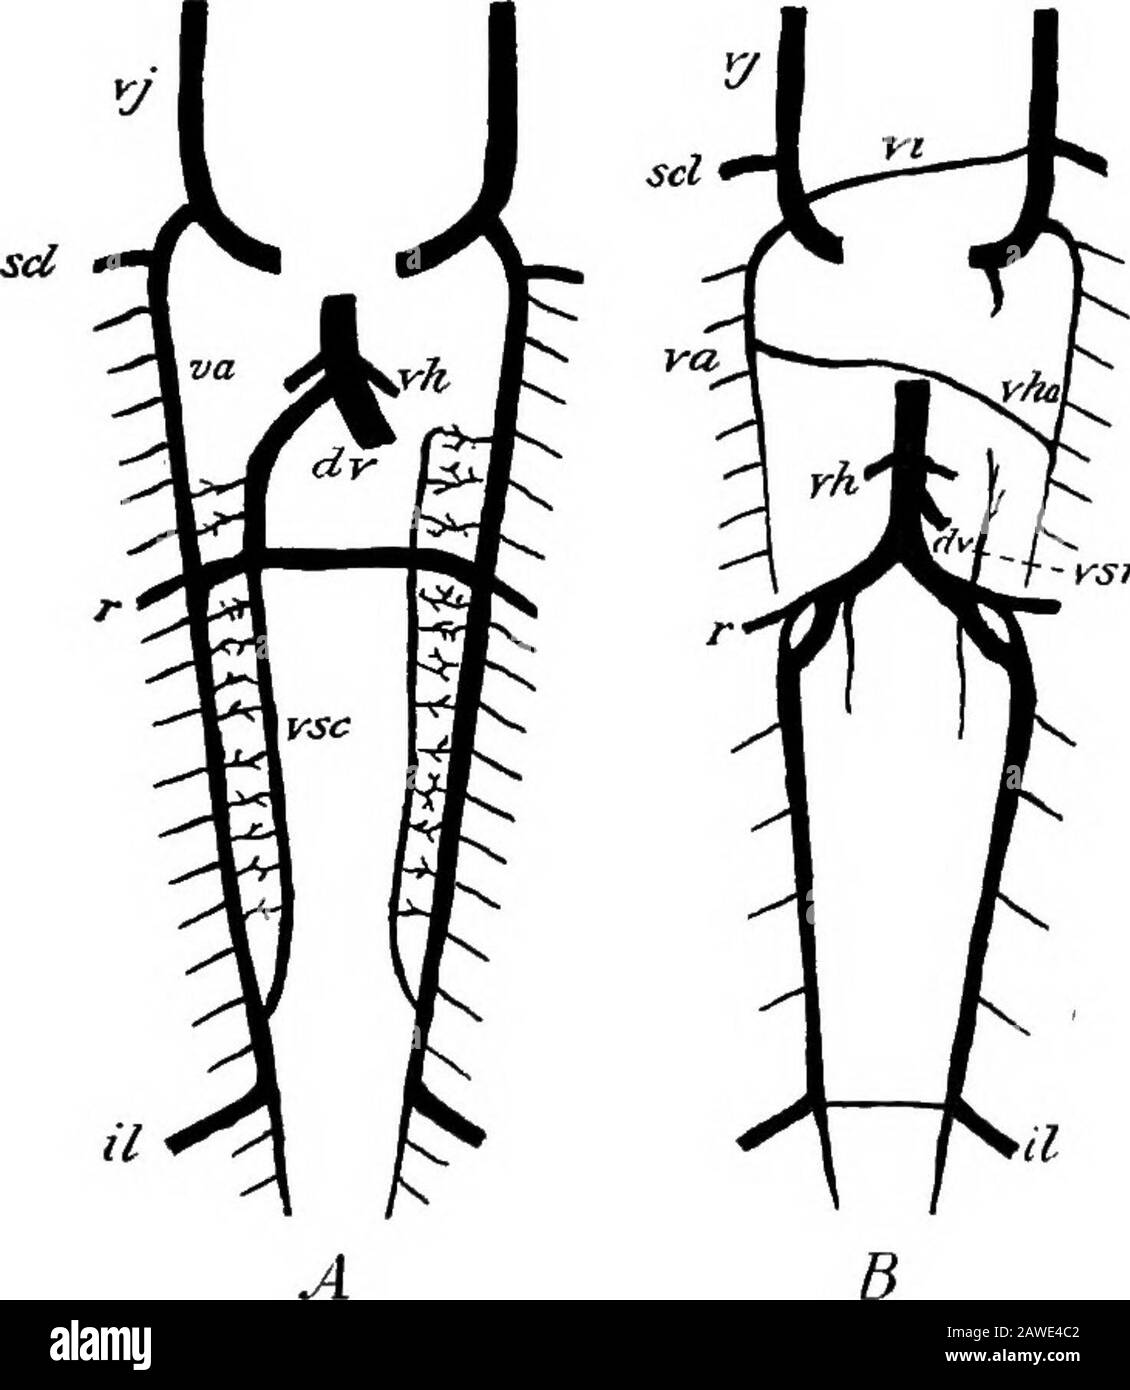 The development of the human body; a manual of human embryology . r). The cross-branch between the two subcardinalspersists, however, and by its connection with the leftcardinal allows the blood from the lower part of that veinto flow over into the vena cava. As the permanent kidneys grow forward (see Chap.xiii) they push their way between the aorta and the poste-rior portions of the cardinal veins, forcing the latter off tothe side and interfering with the flow of blood in them, adifficulty which is overcome by the development of abranch from each cardinal, just above the kidney, whichpasses Stock Photo